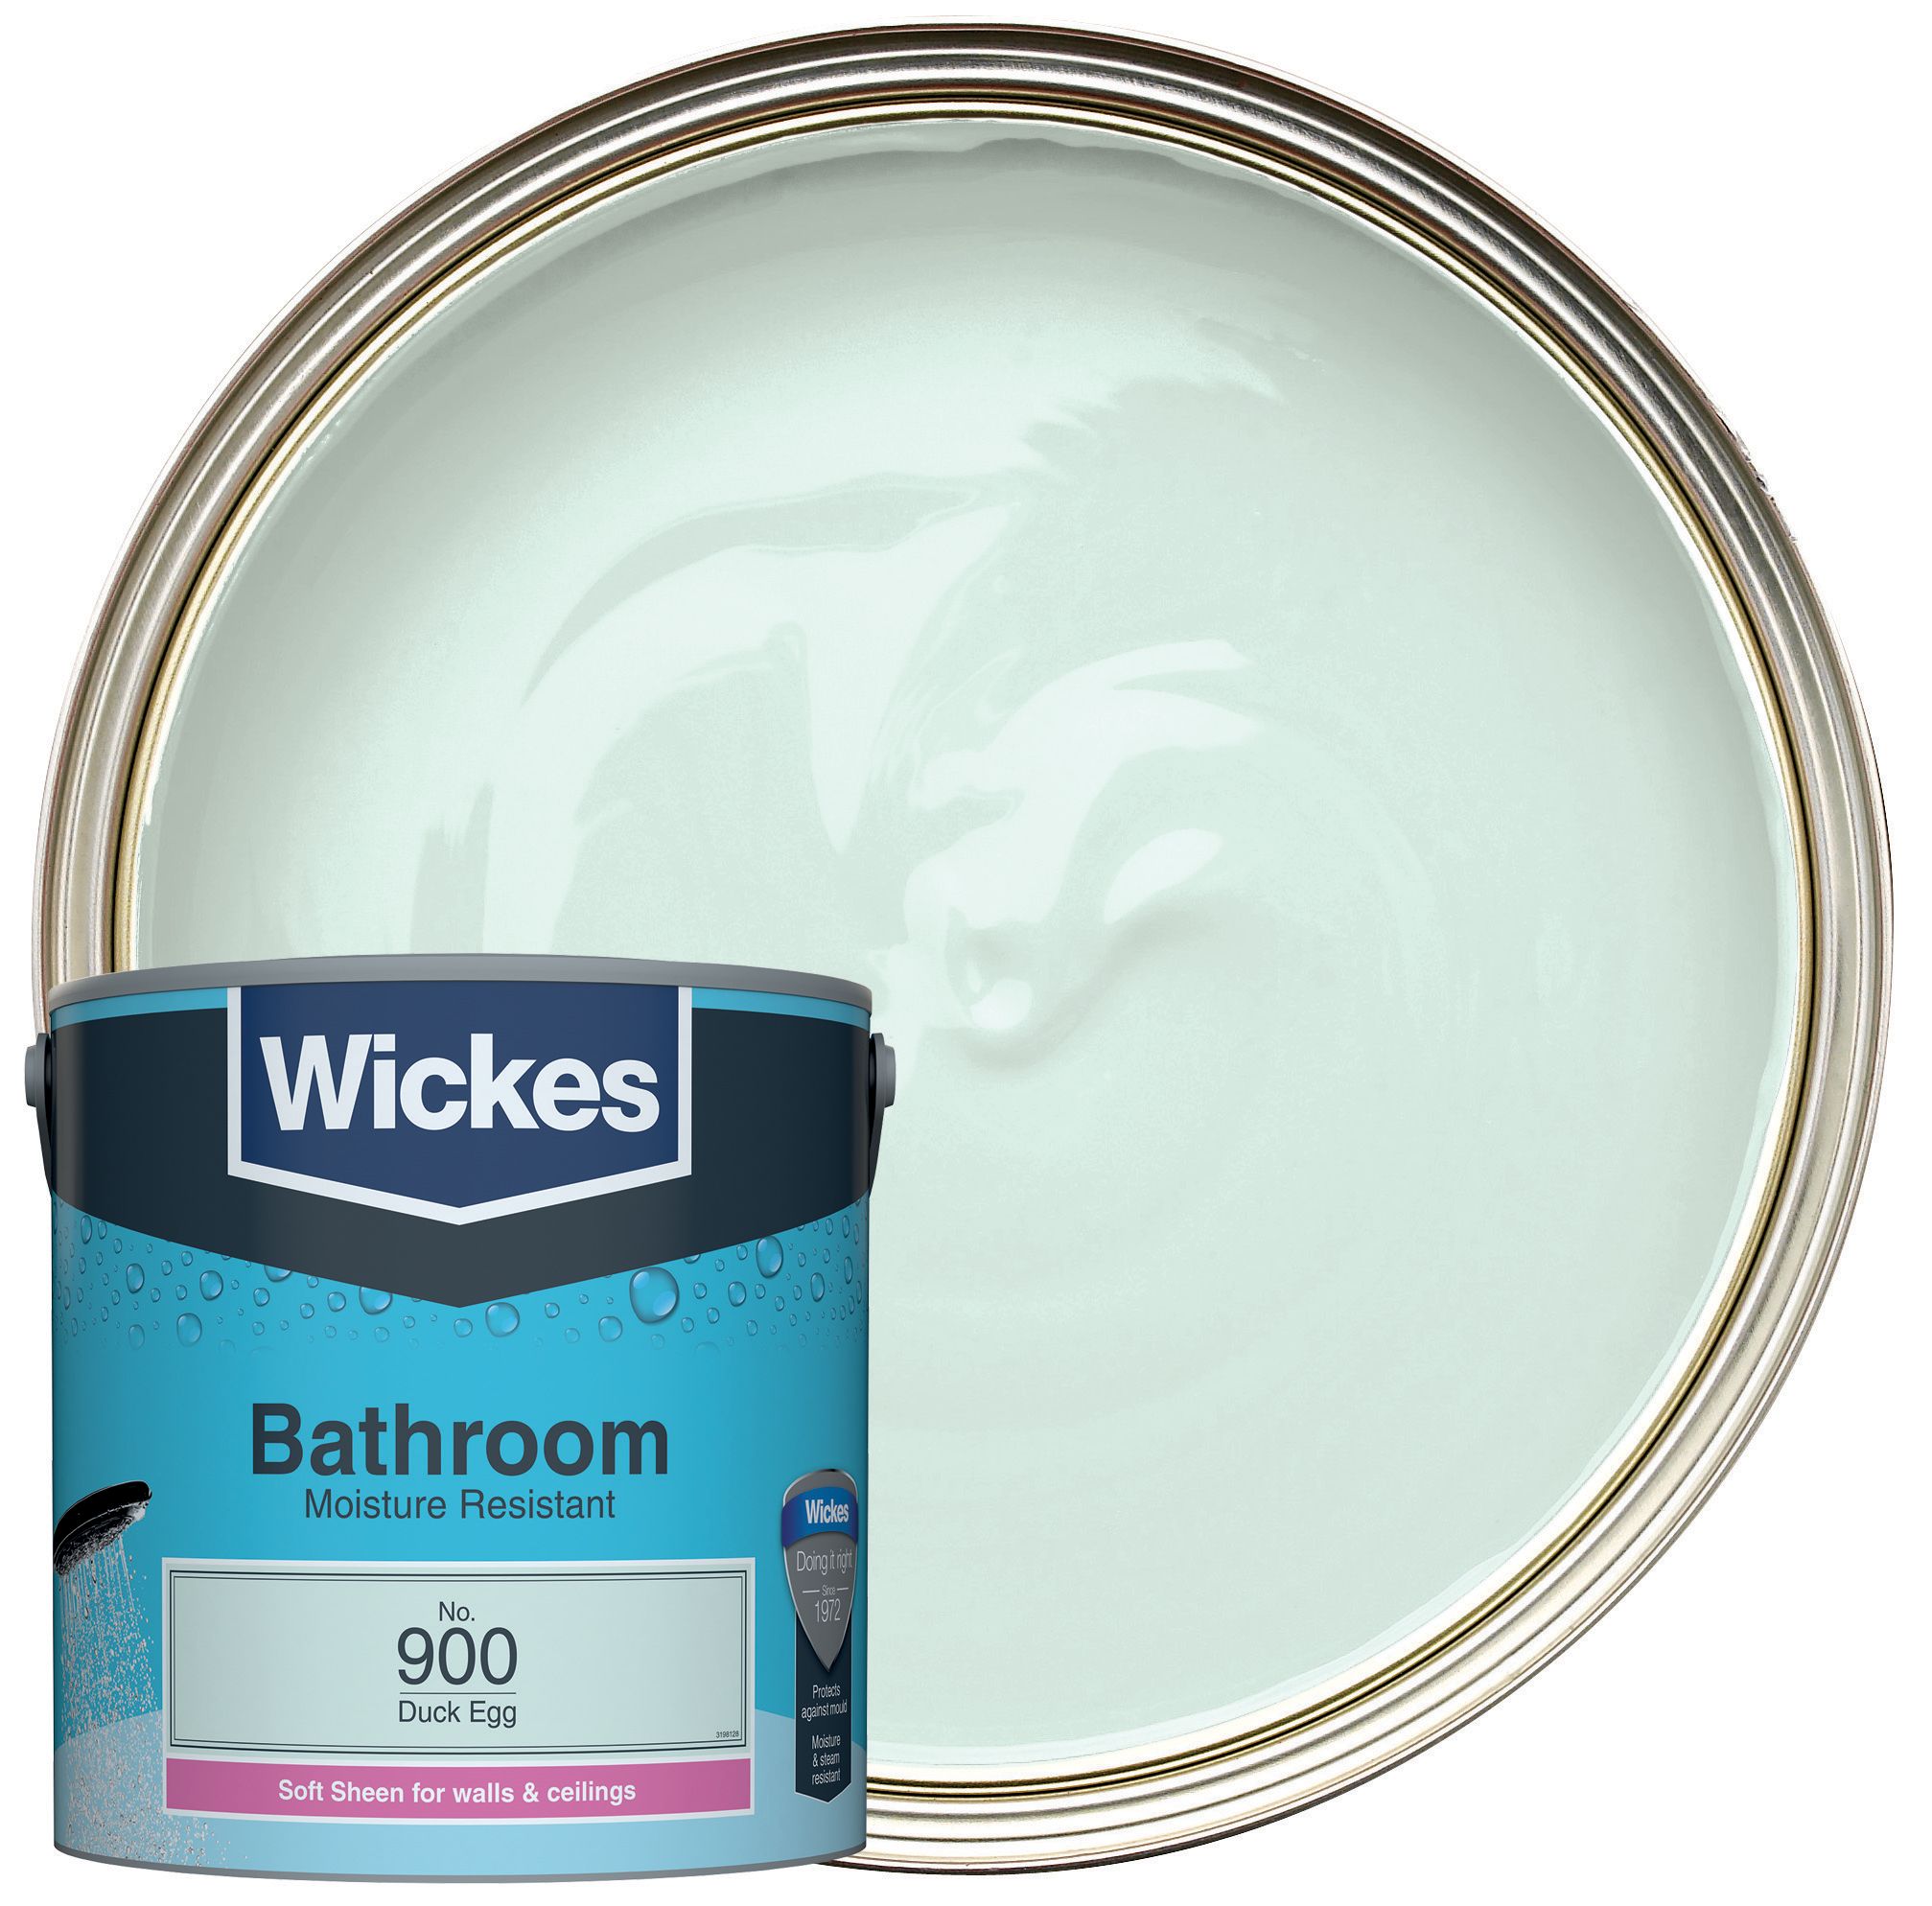 Image of Wickes Bathroom Soft Sheen Emulsion Paint - Duck Egg No.900 - 2.5L